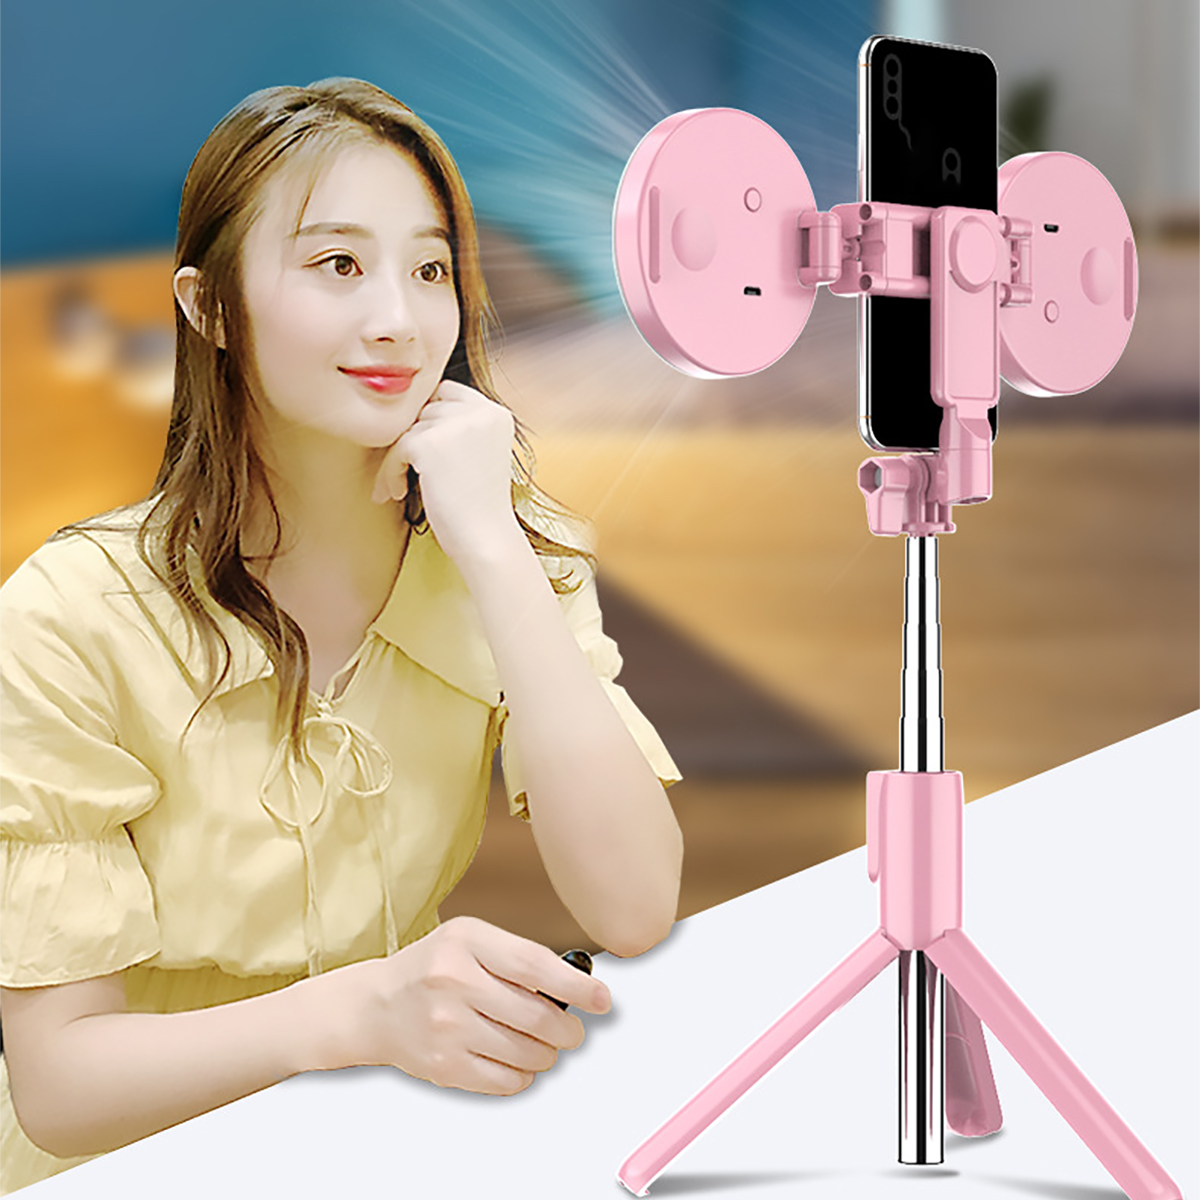 Telescopic-Fill-Light-Multifunctional-bluetooth-Selfie-Stick-Tripod-Outdoor-Mobile-Phone-Photography-1760893-7